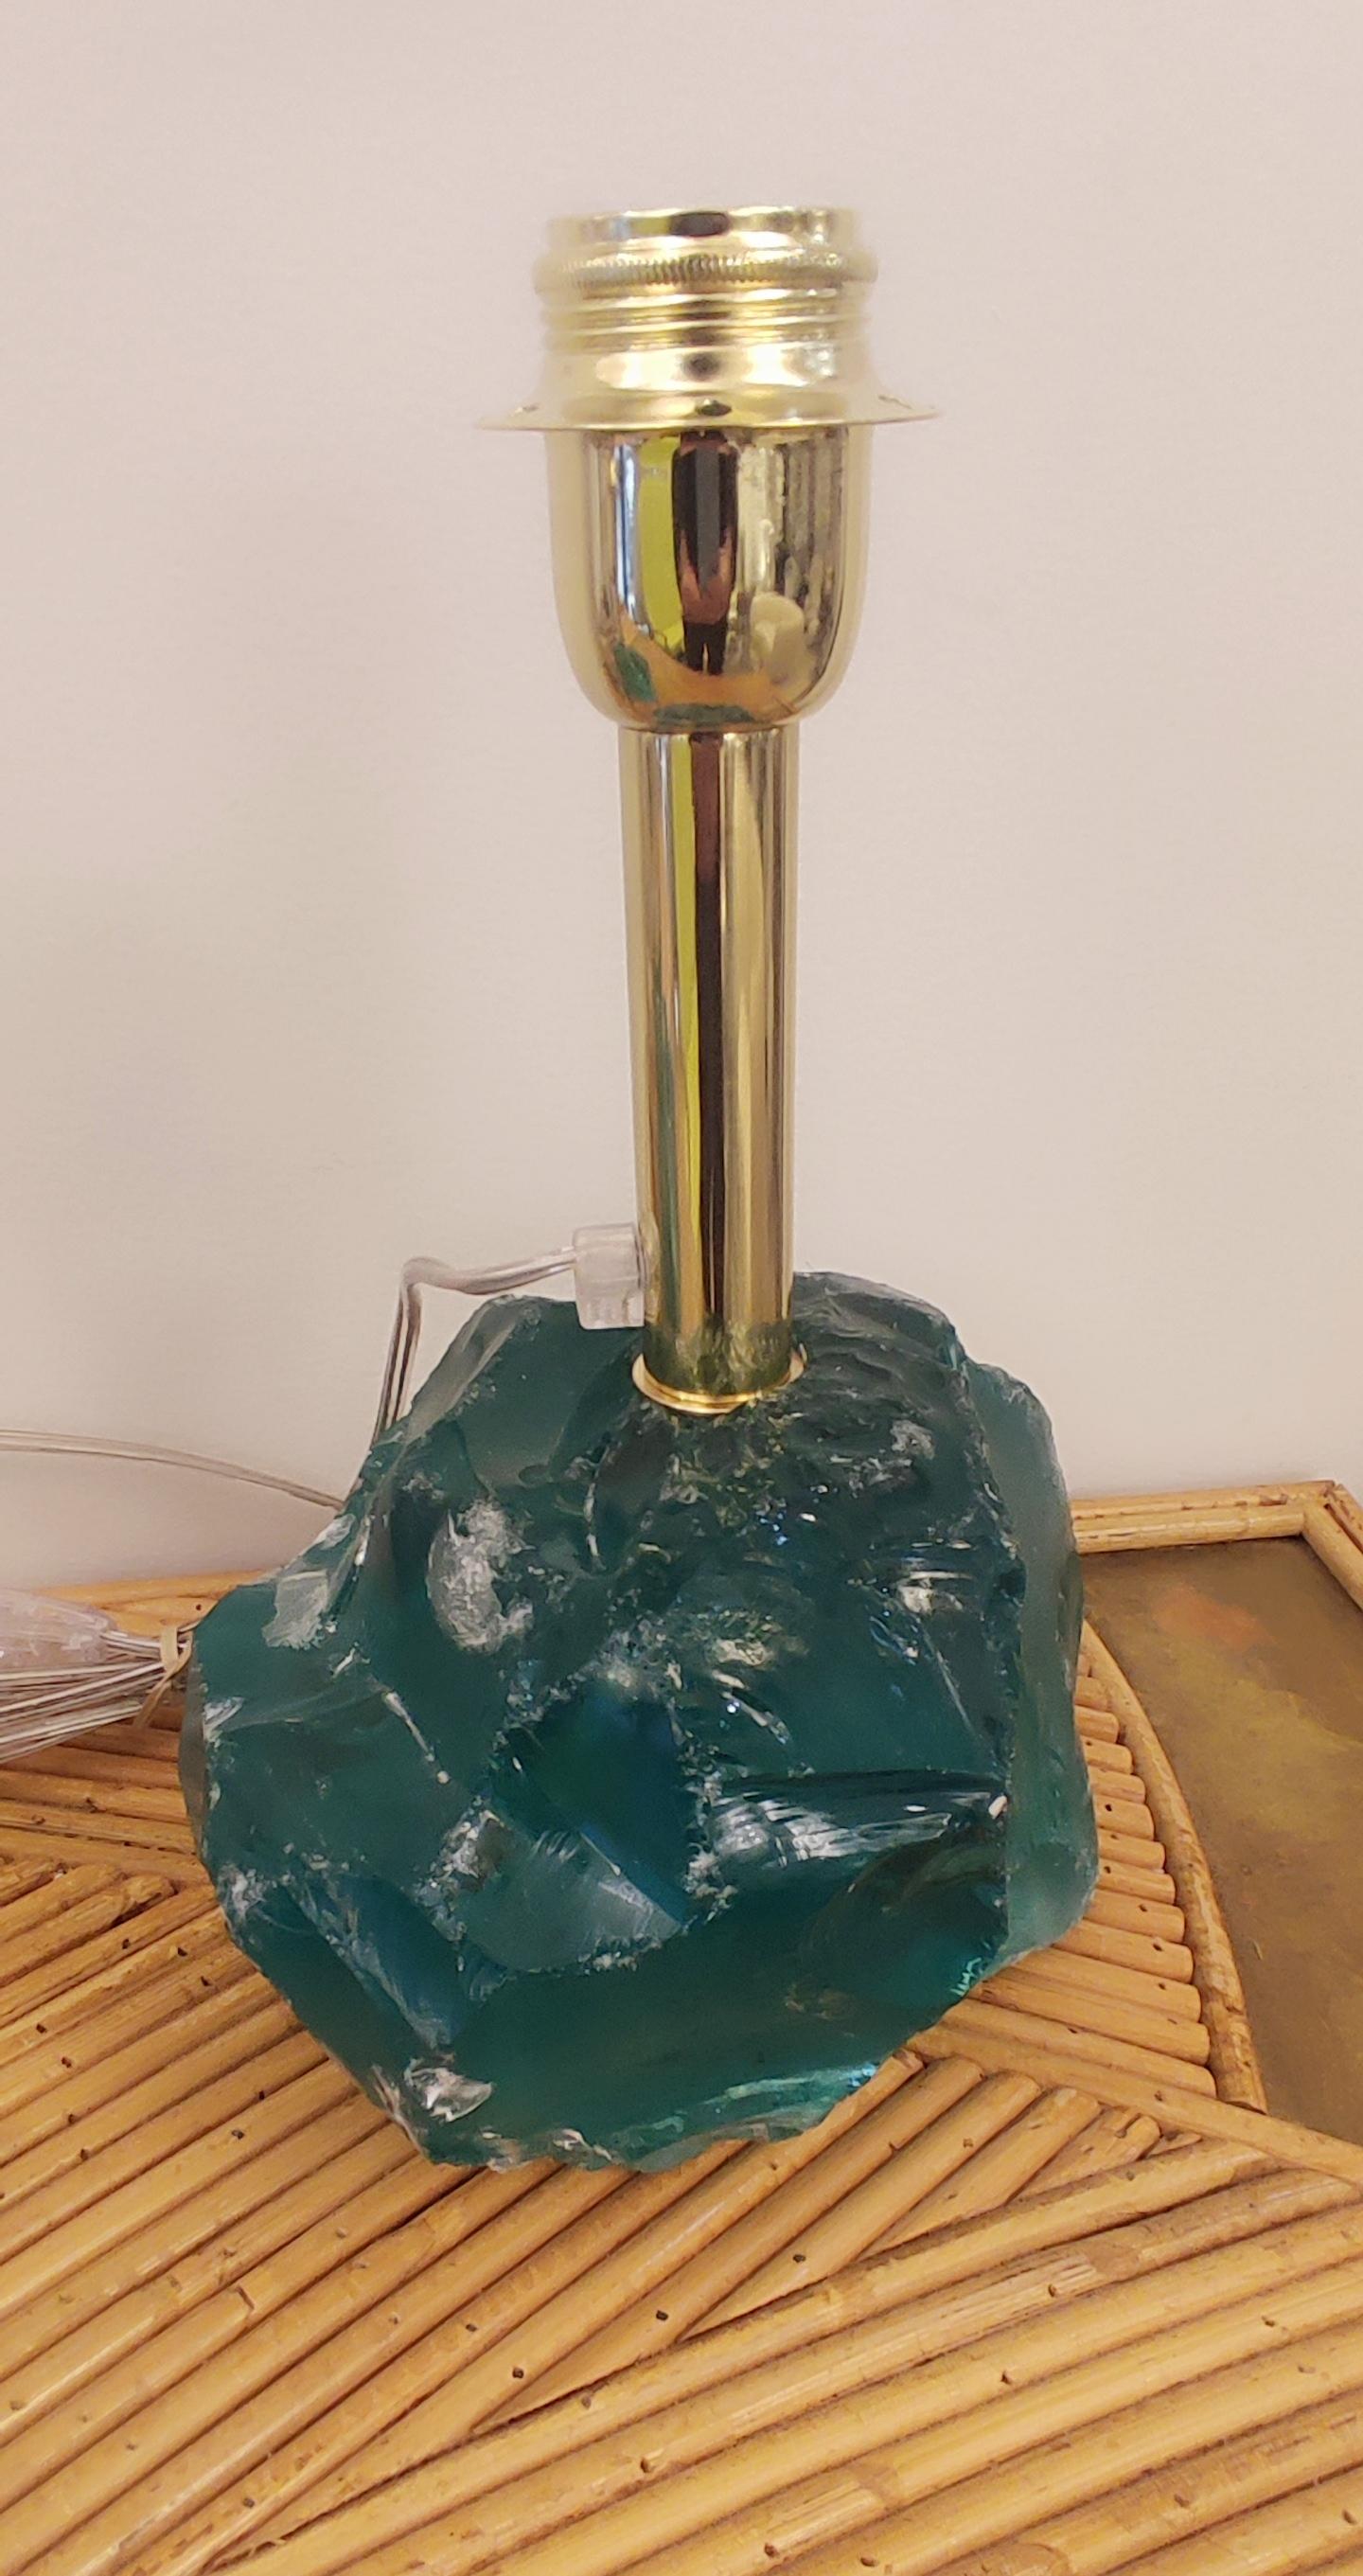 Pair of Brutalist Murano glass table lamps, made of a block of turquoise glass
Wired for europe and USA
one H 31 cm, the other 29 cm